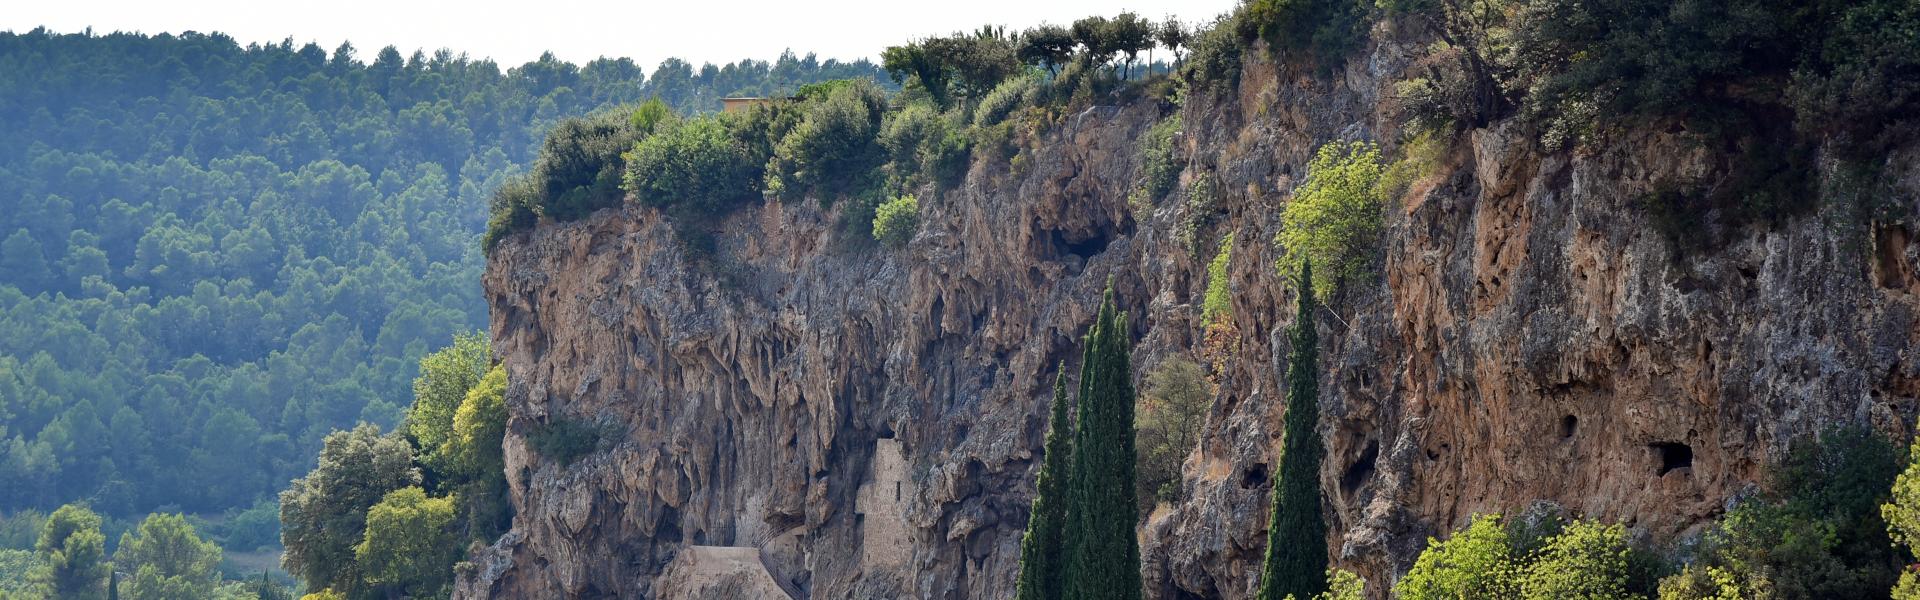 landscape of Cotignac city with troglodyte cavesand tower on top. Provence, France.